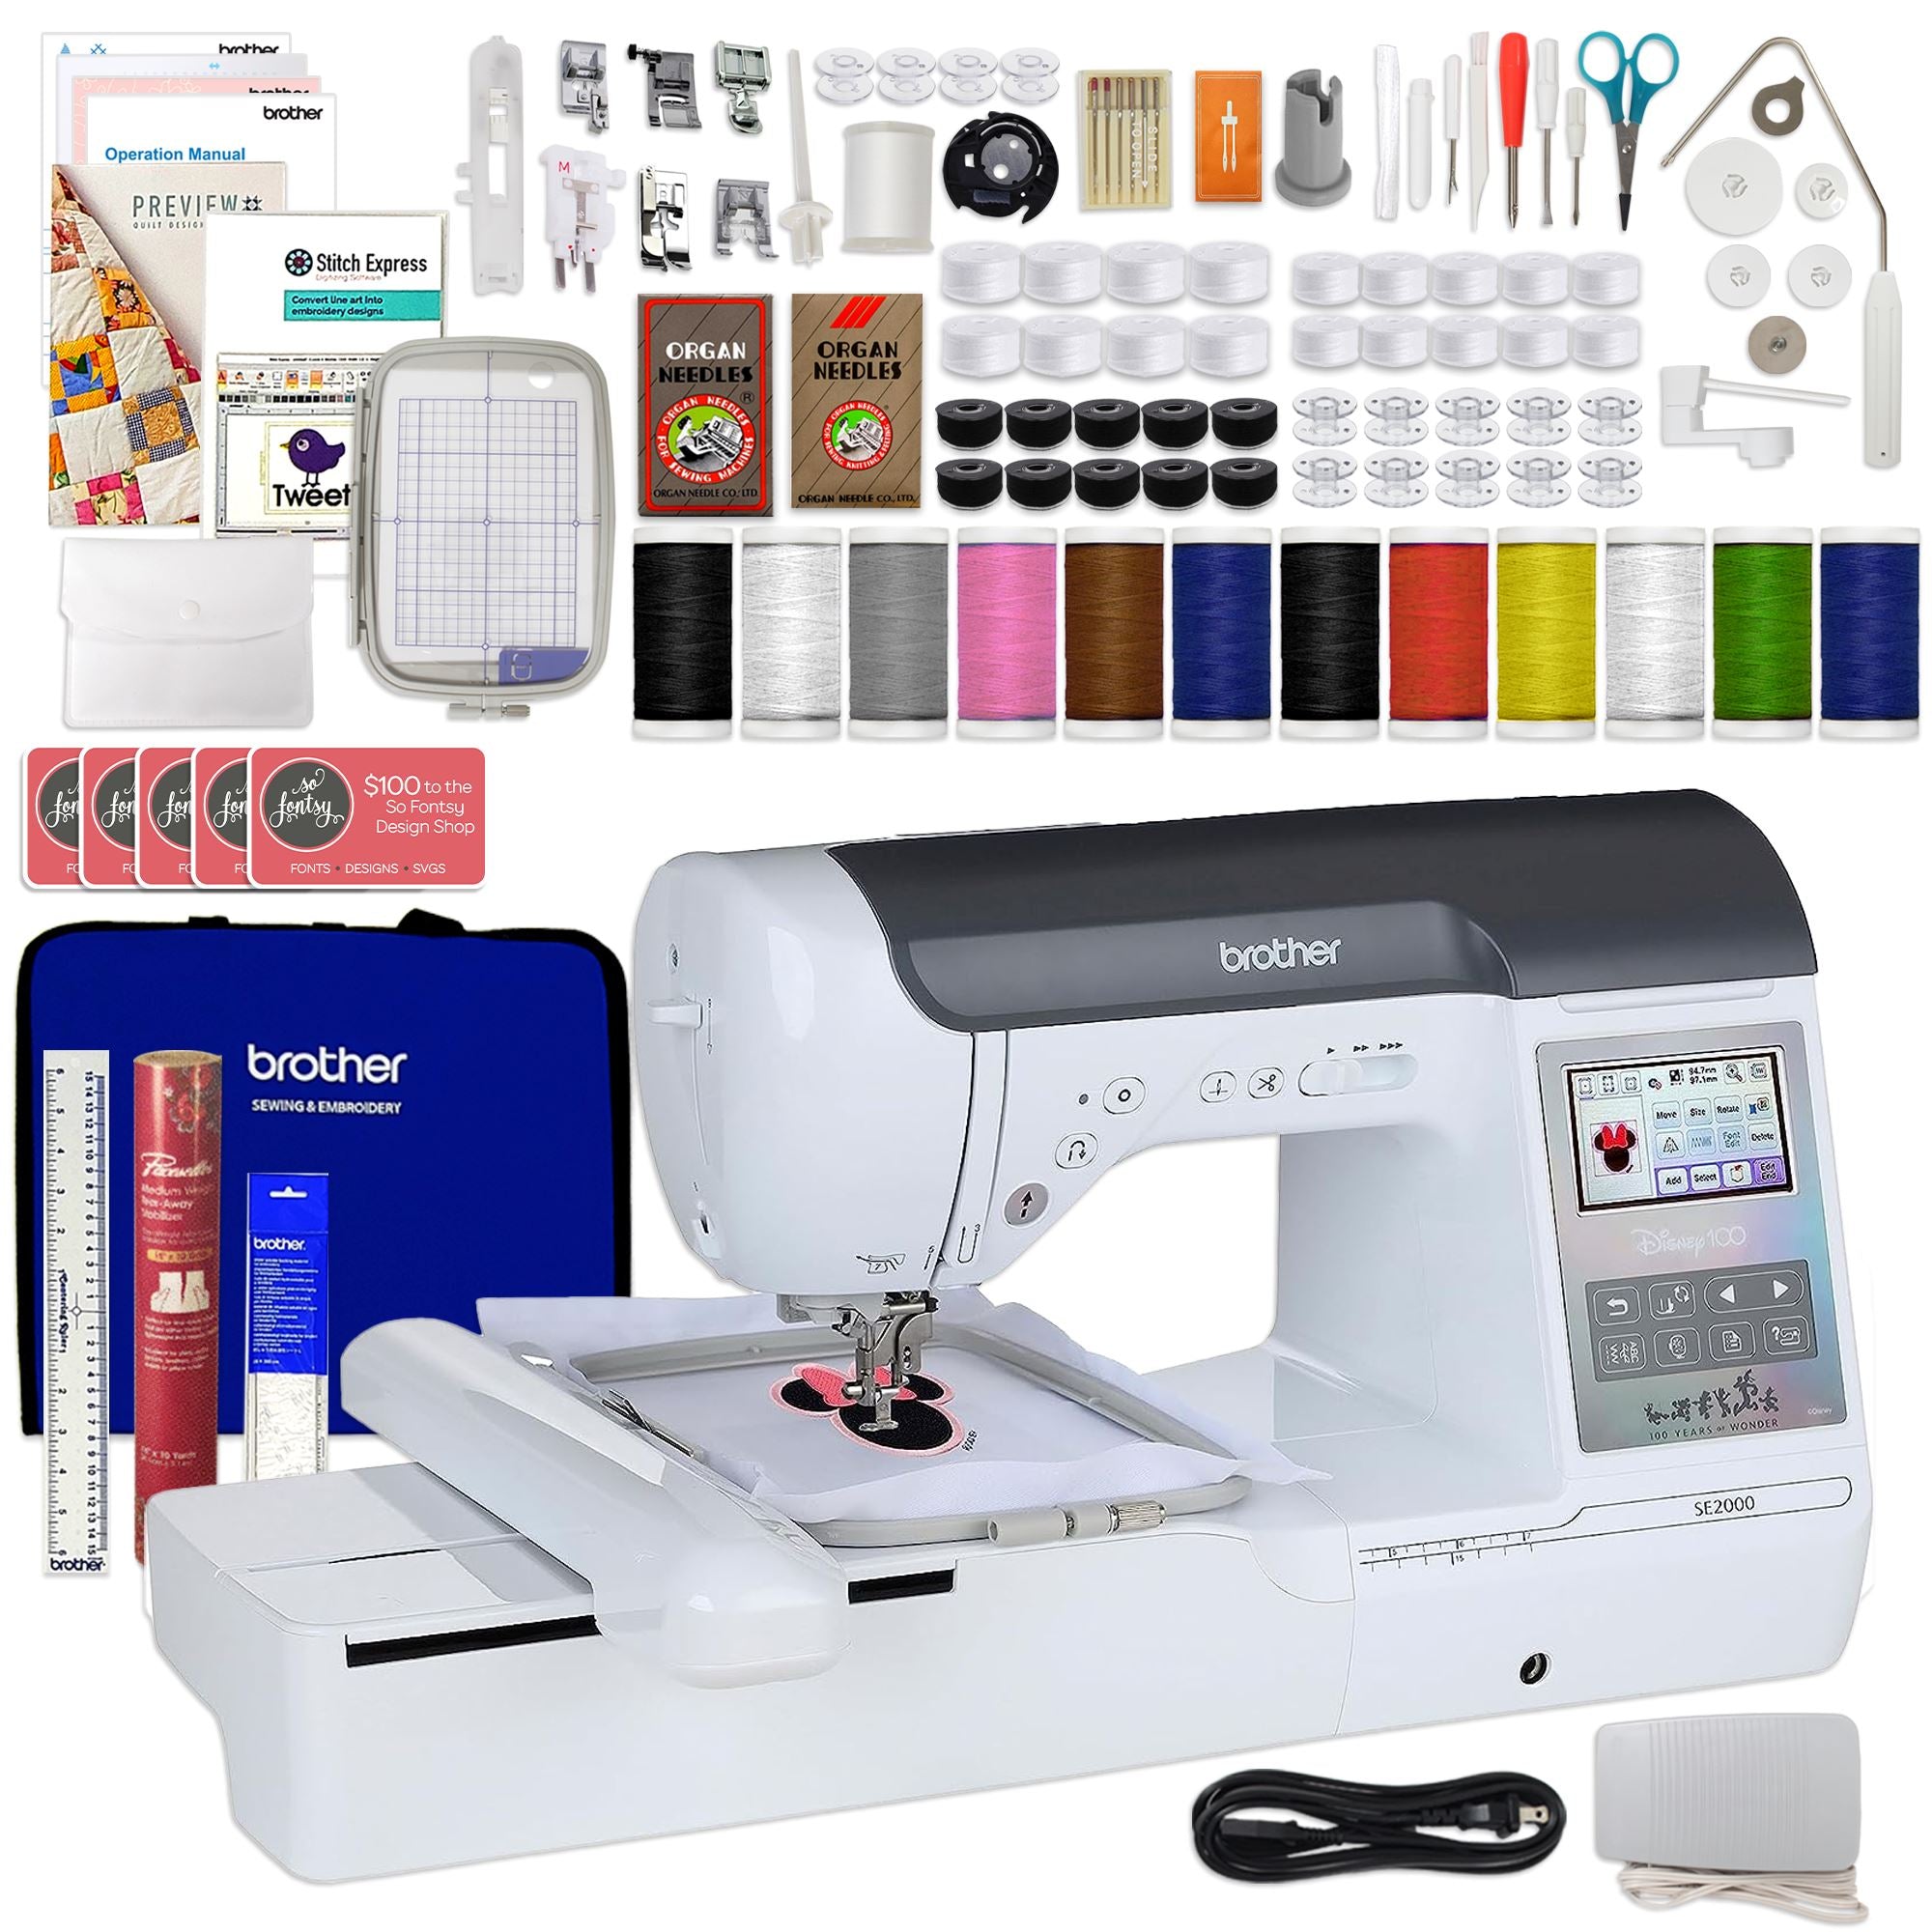 Brother SE600 Sewing and Embroidery Machine 4x4 With SABESBLUE Software and  $199 Bonus Bundle